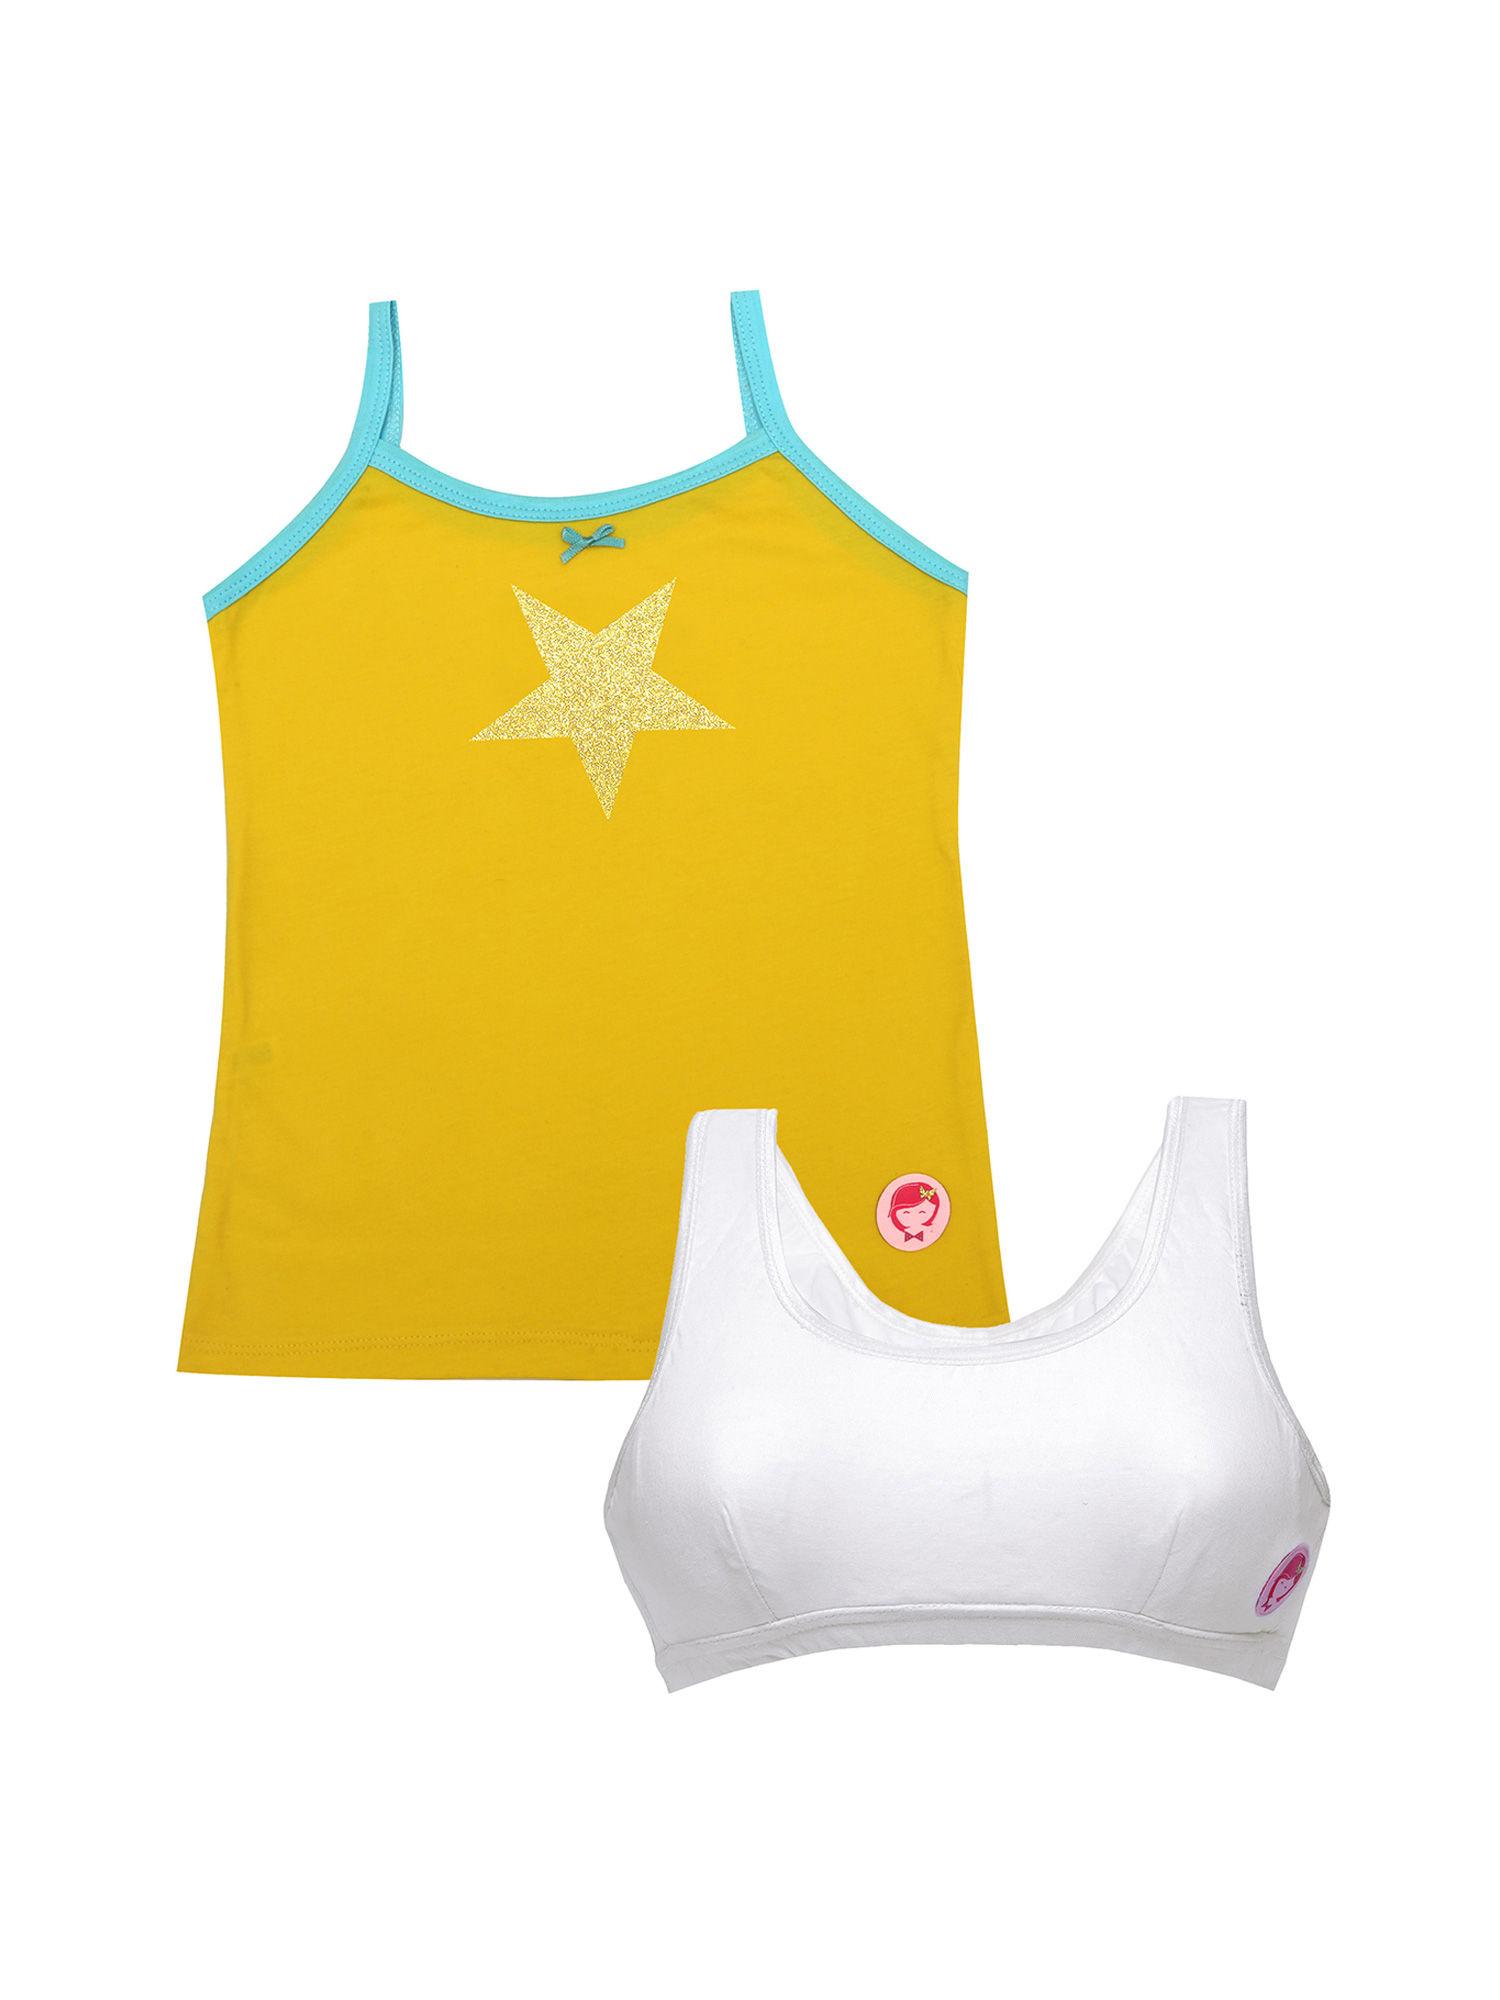 pack of 2 yellow camisole & white beginners sports bra set for girls